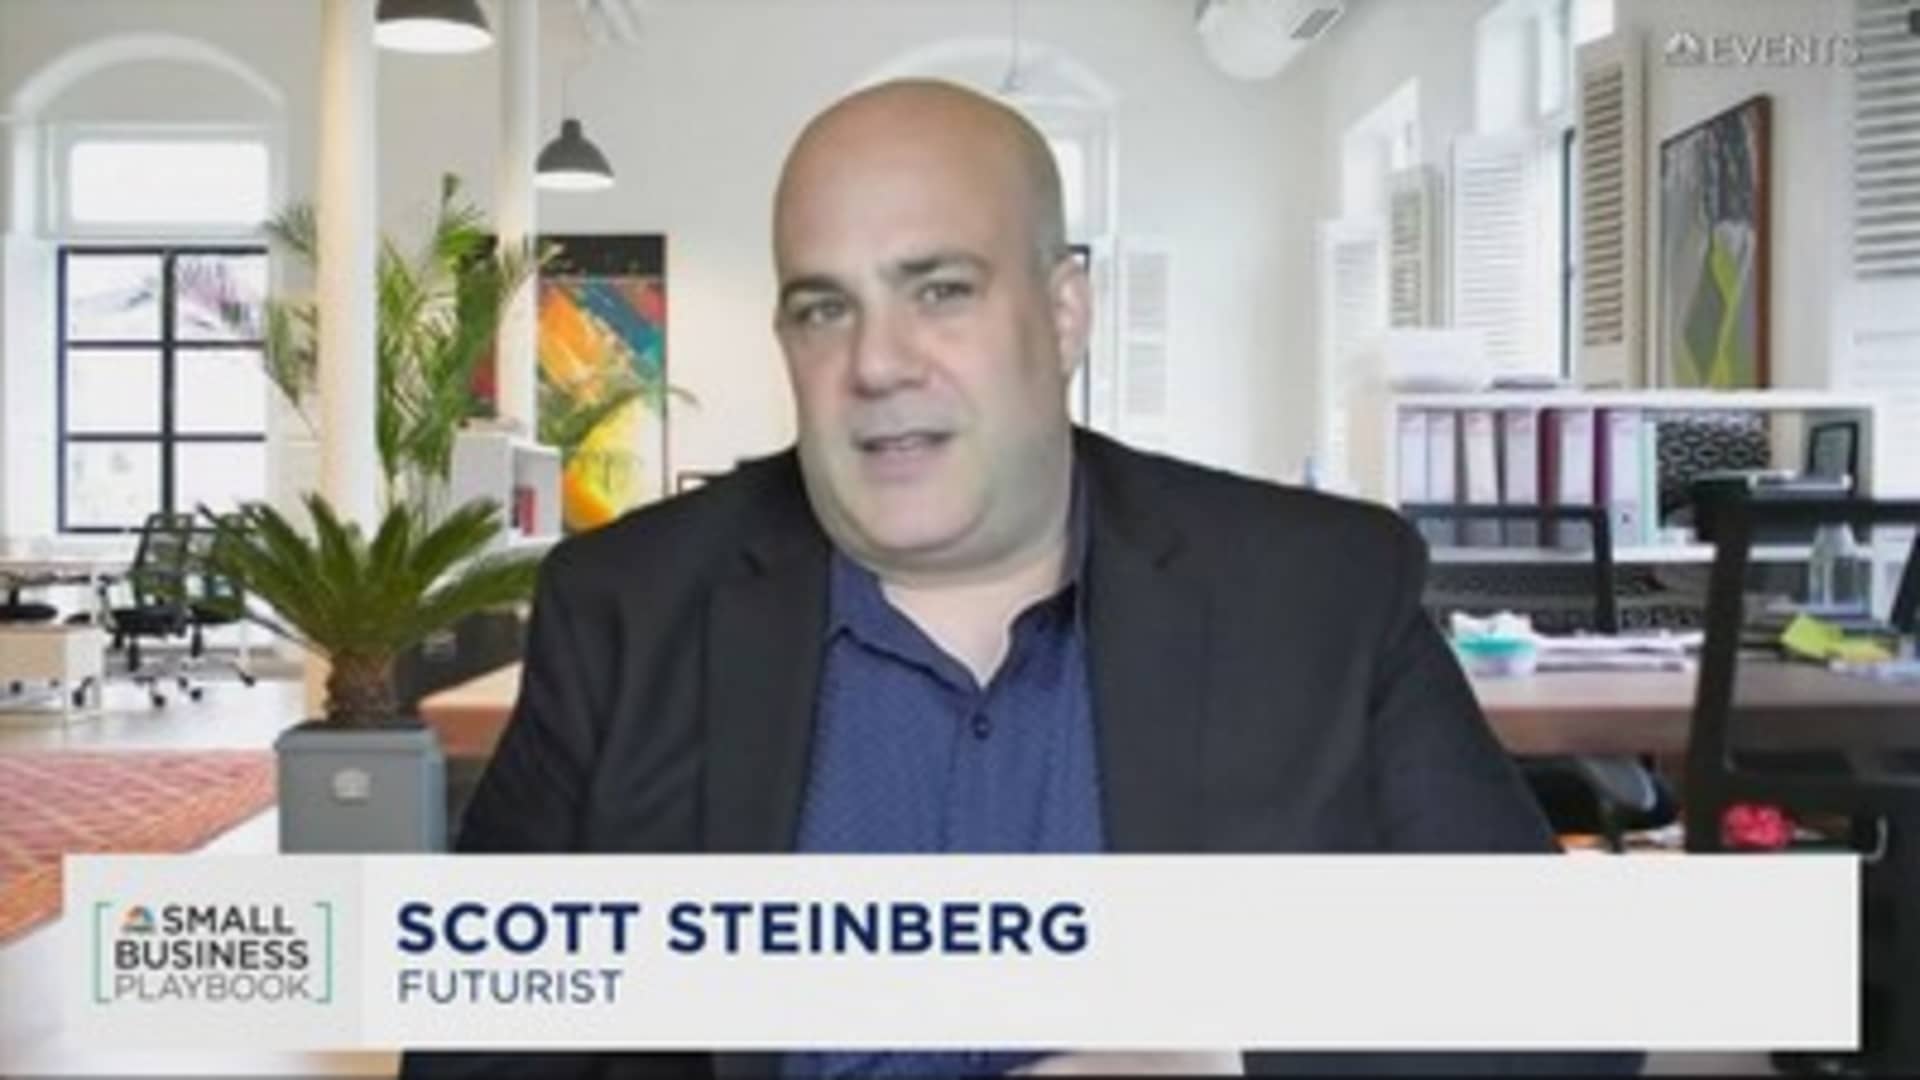 The Future of Small Business: Innovating for Tomorrow [Video]